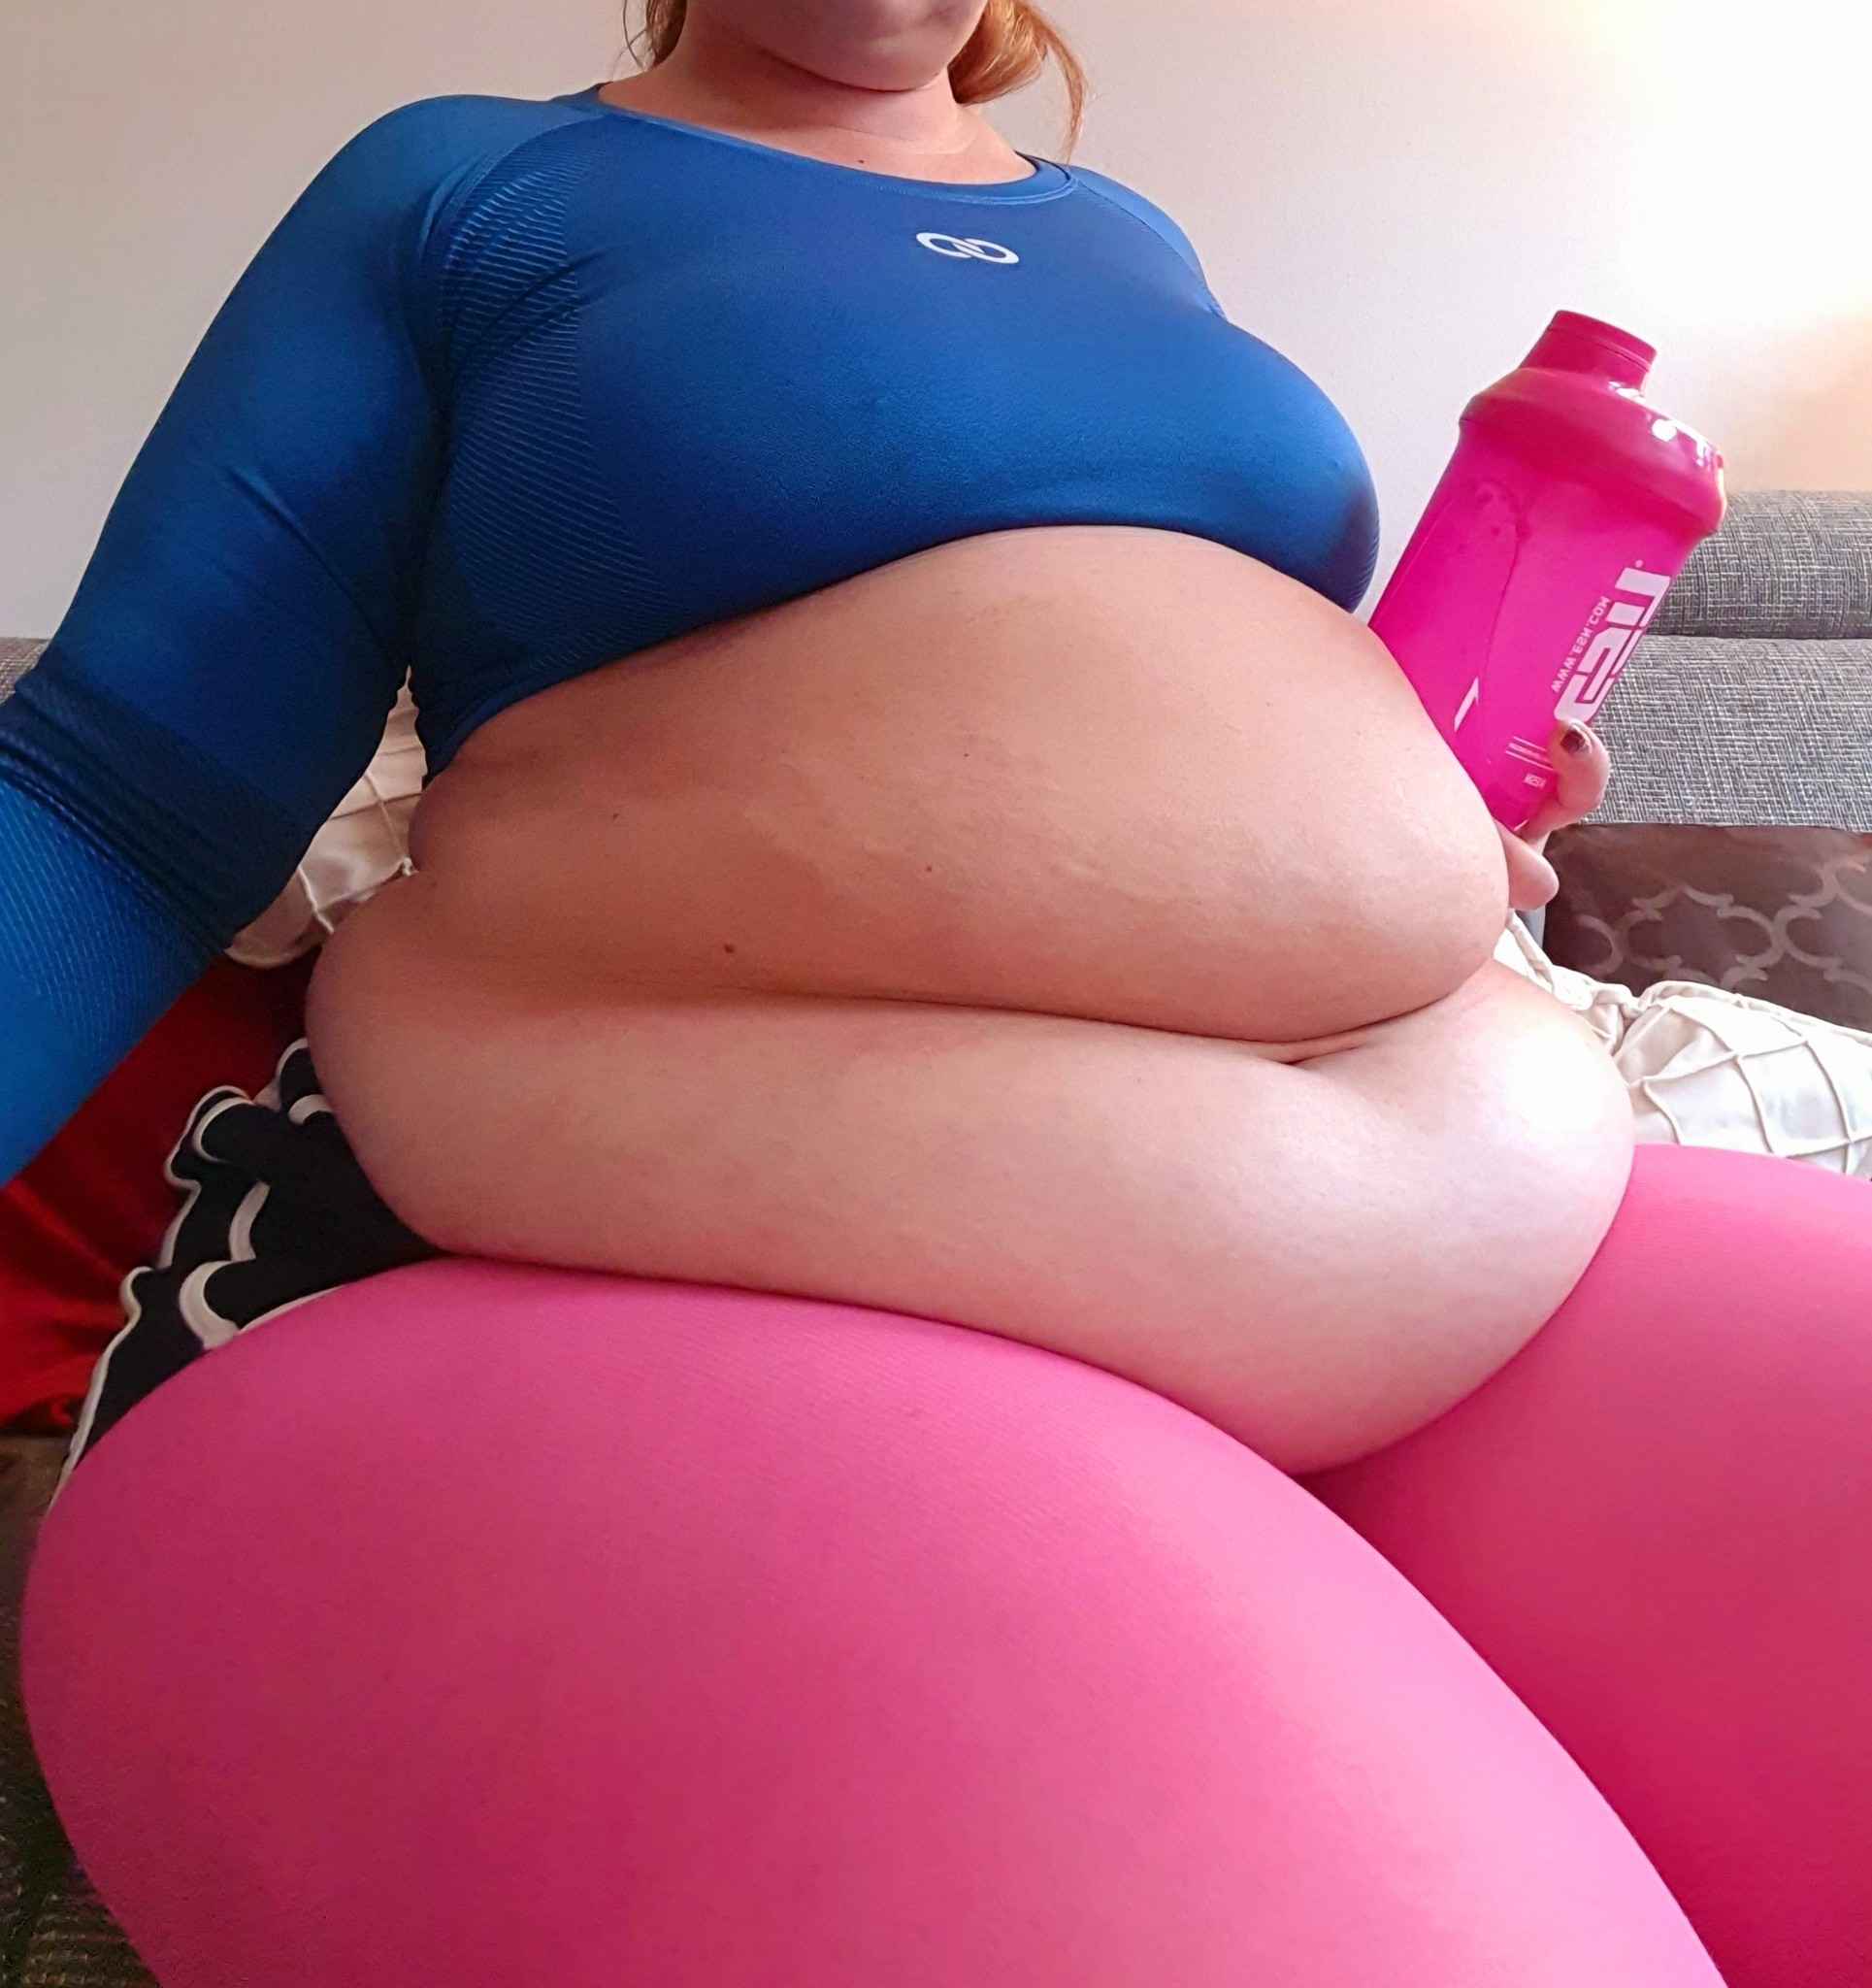 hotsummerfatty-reloaded:Not only my belly adult photos